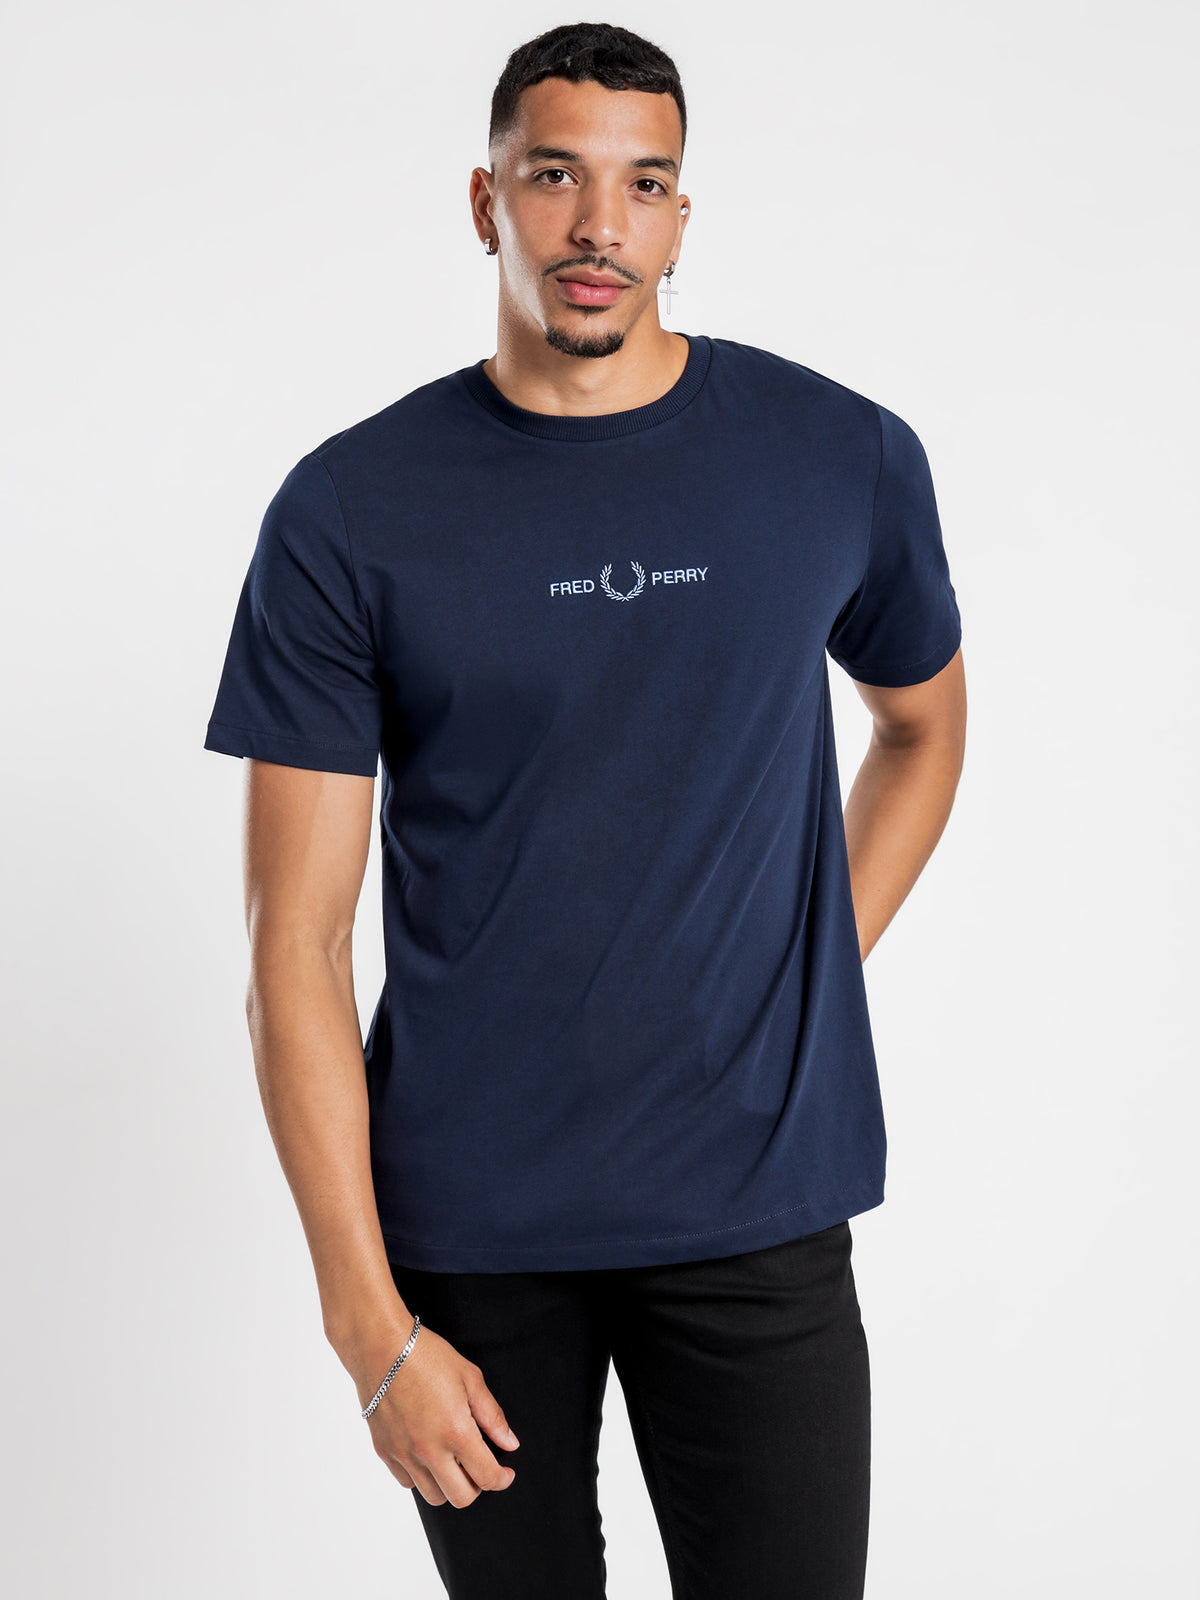 Graphic T-Shirt in Carbon Blue